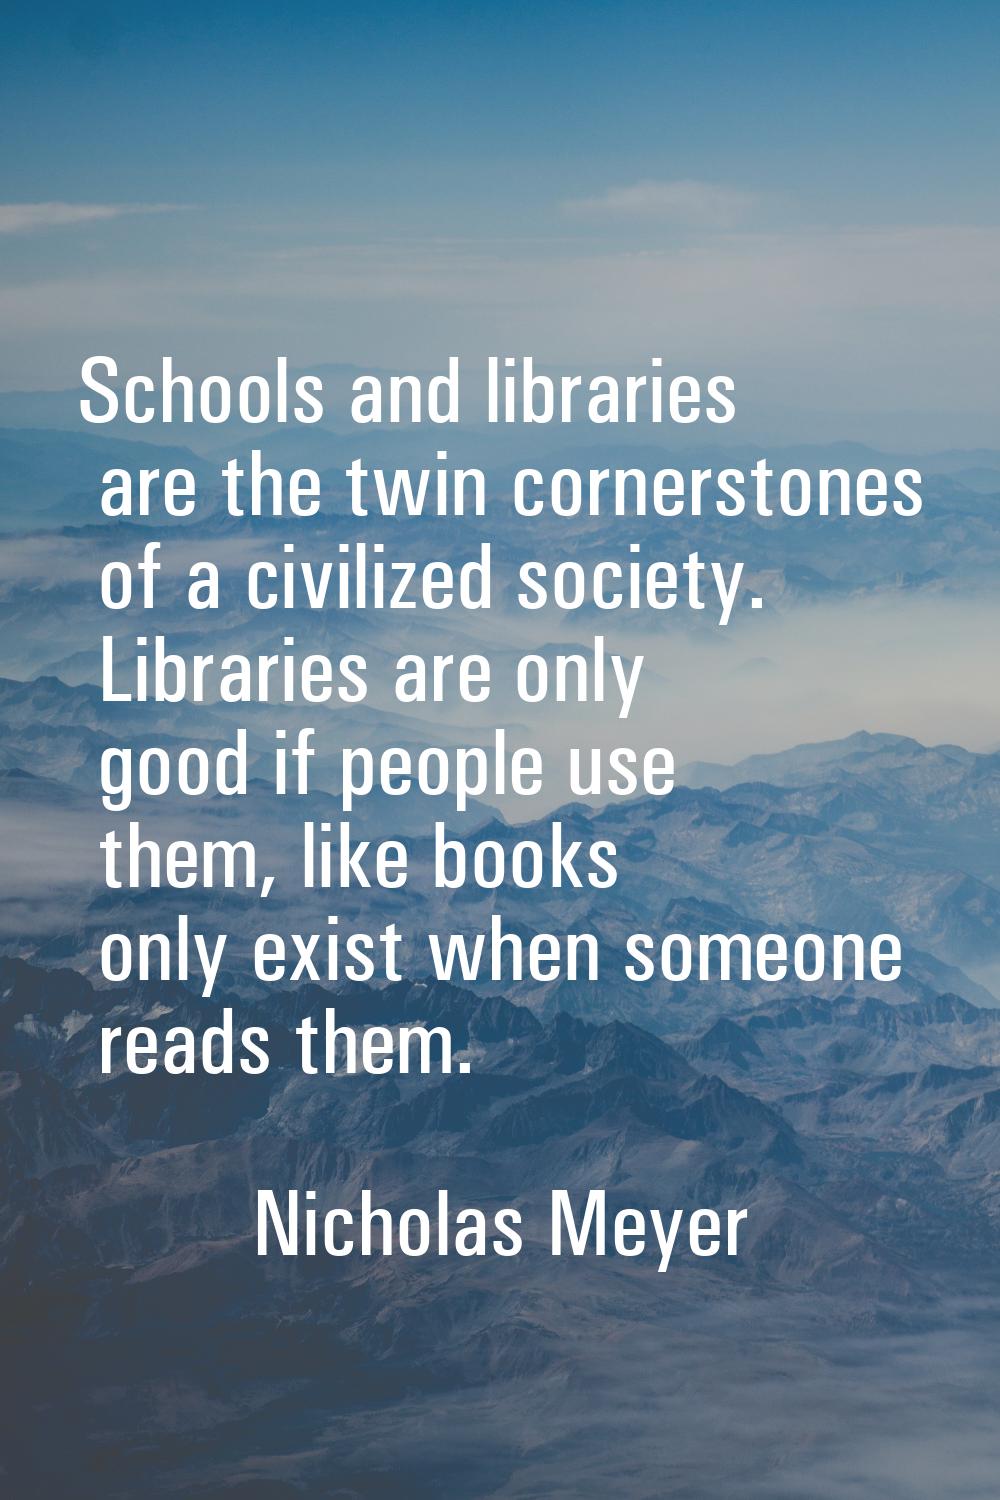 Schools and libraries are the twin cornerstones of a civilized society. Libraries are only good if 